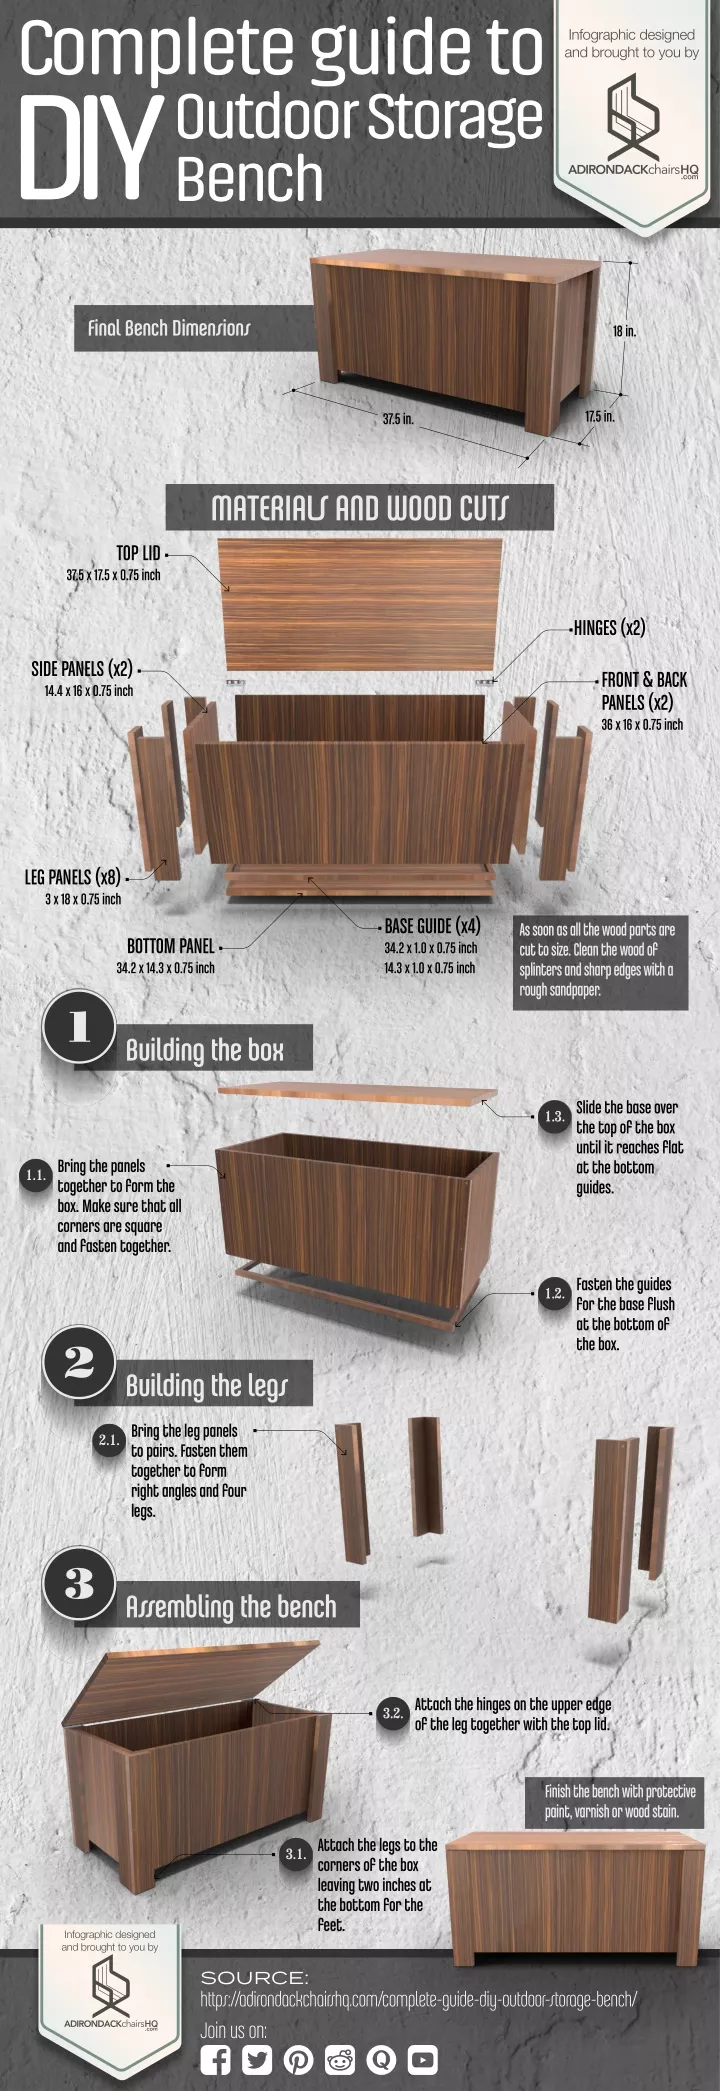 complete guide to outdoor storage bench diy